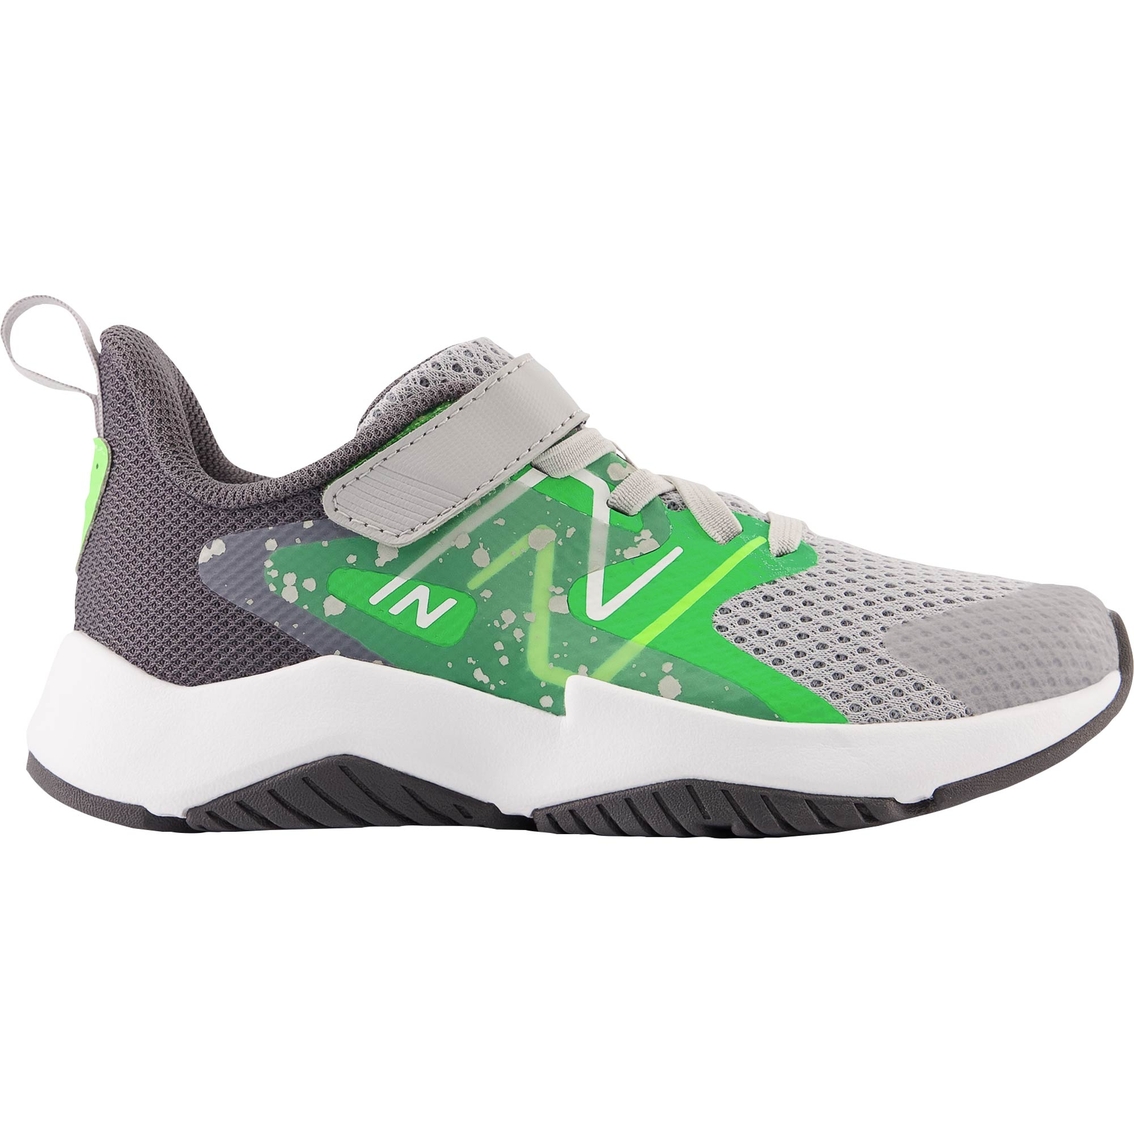 New Balance Boys Rave Run v2 Bungee Lace with Hook and Loop Top Strap Shoes - Image 2 of 3